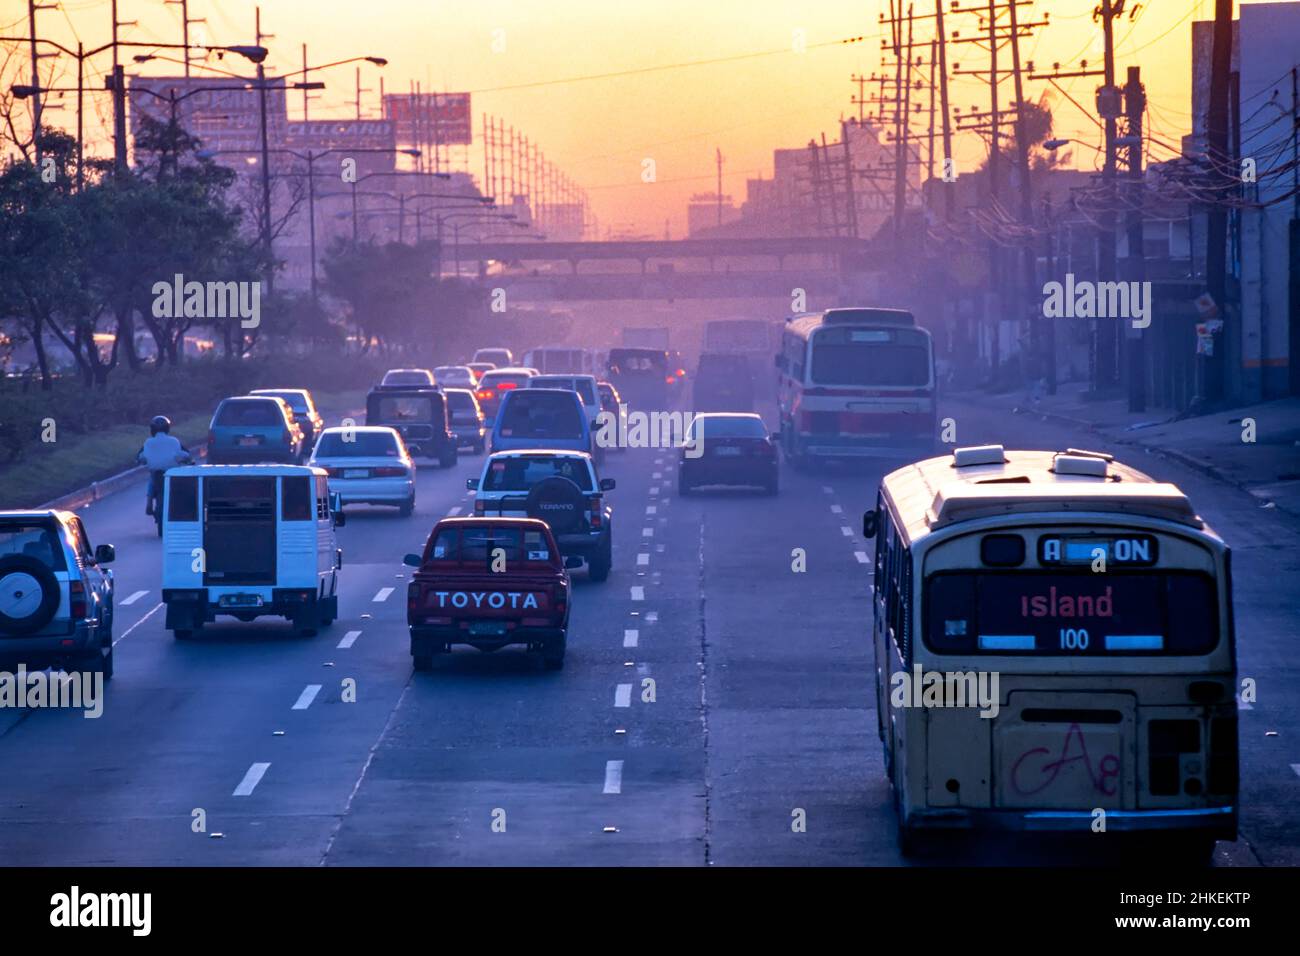 Traffic pollution and haze on EDSA ring road, Manila, Philippines Stock Photo